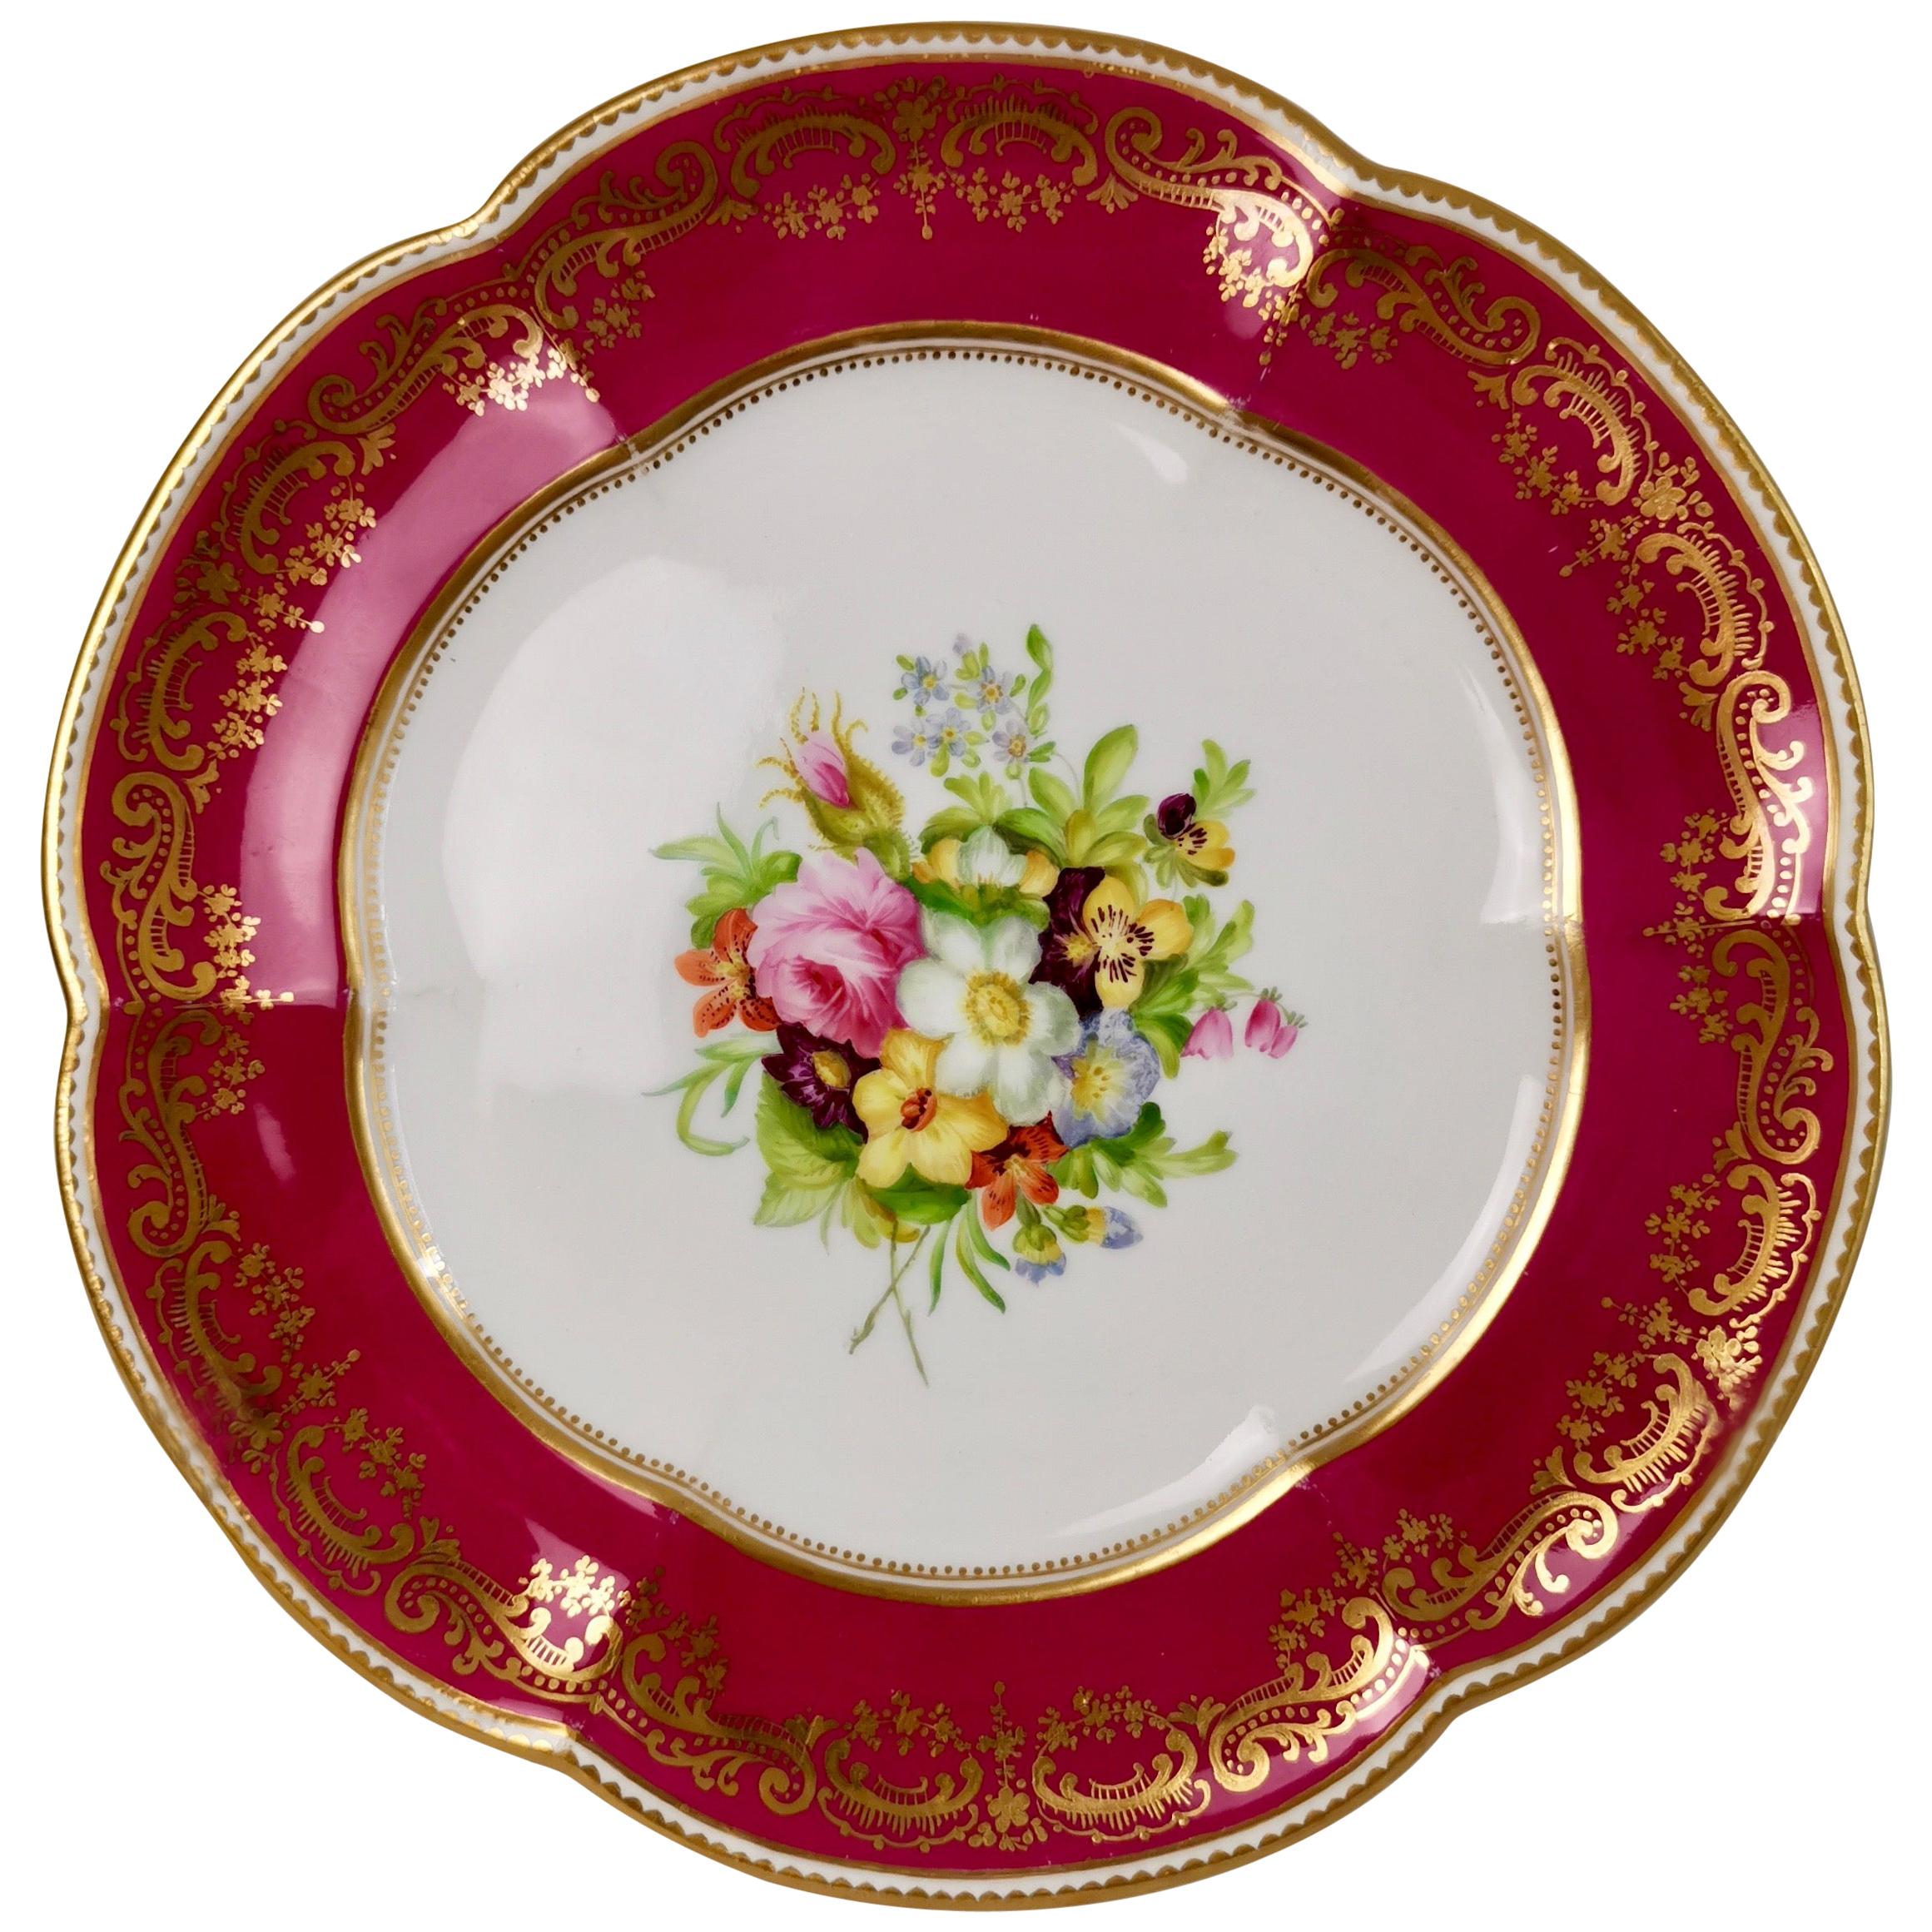 Coalport Porcelain Plate, Maroon with Flowers by Thomas Dixon, circa 1860